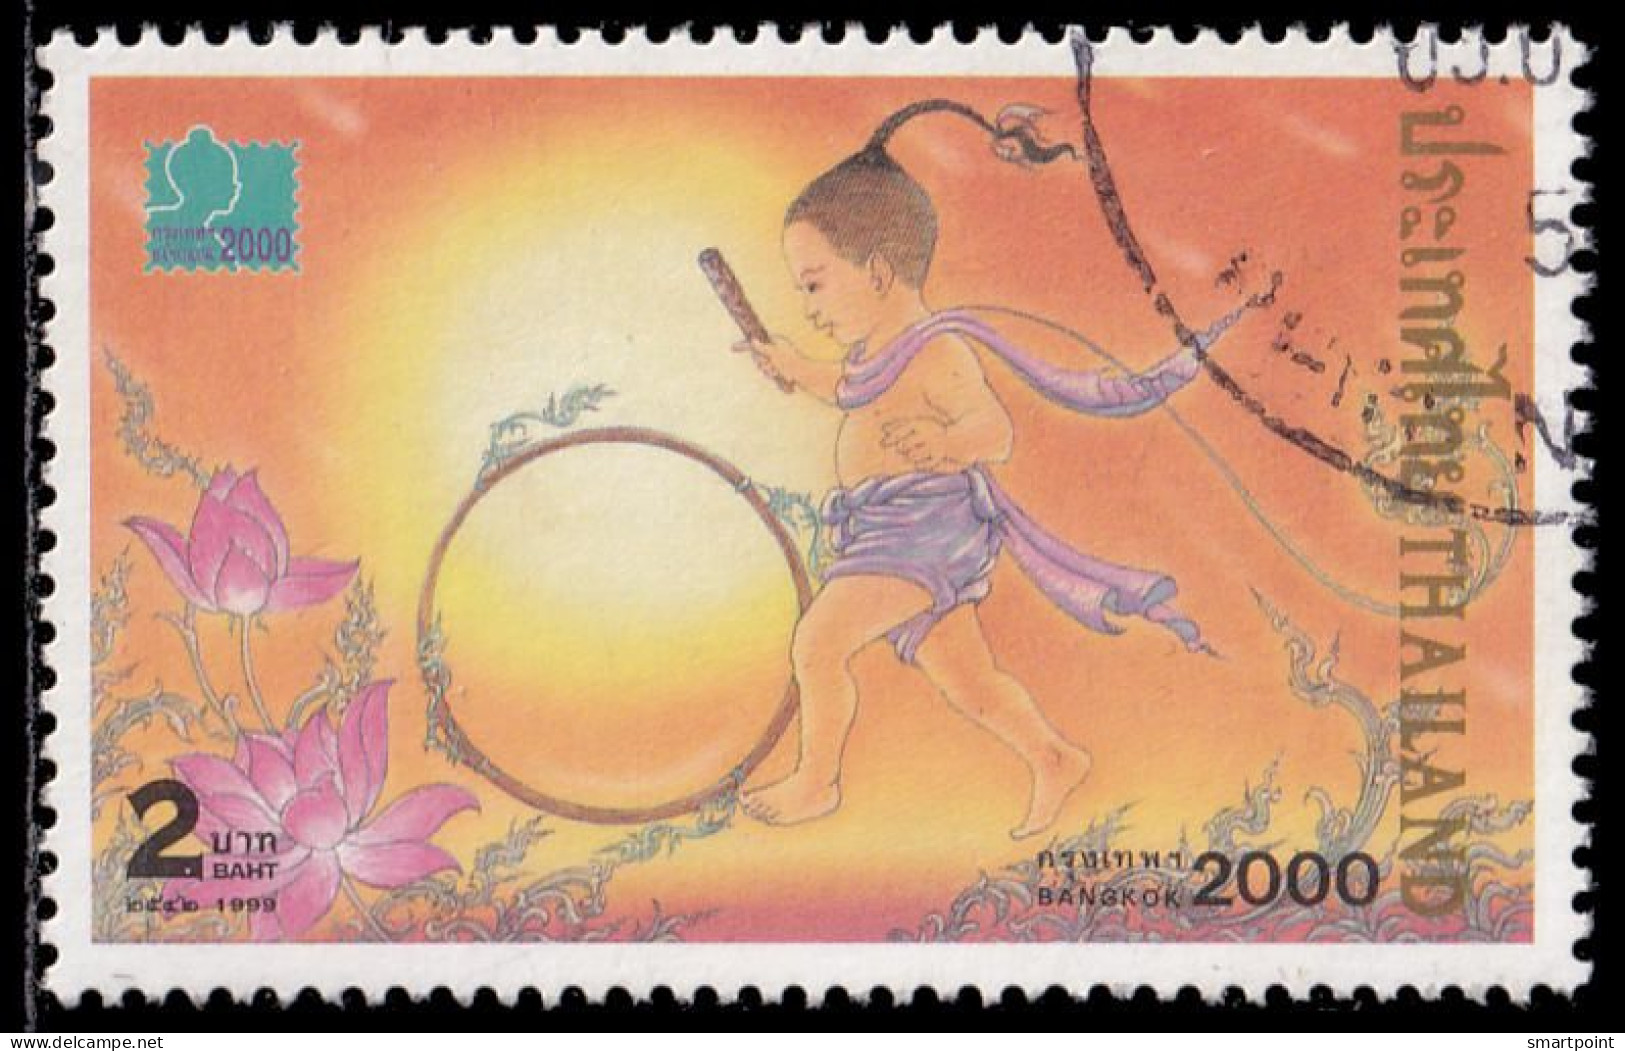 Thailand Stamp 1999 BANGKOK 2000 World Youth And 13th Asian International Stamp Exhibition (1st Series) 2 Baht - Used - Thaïlande